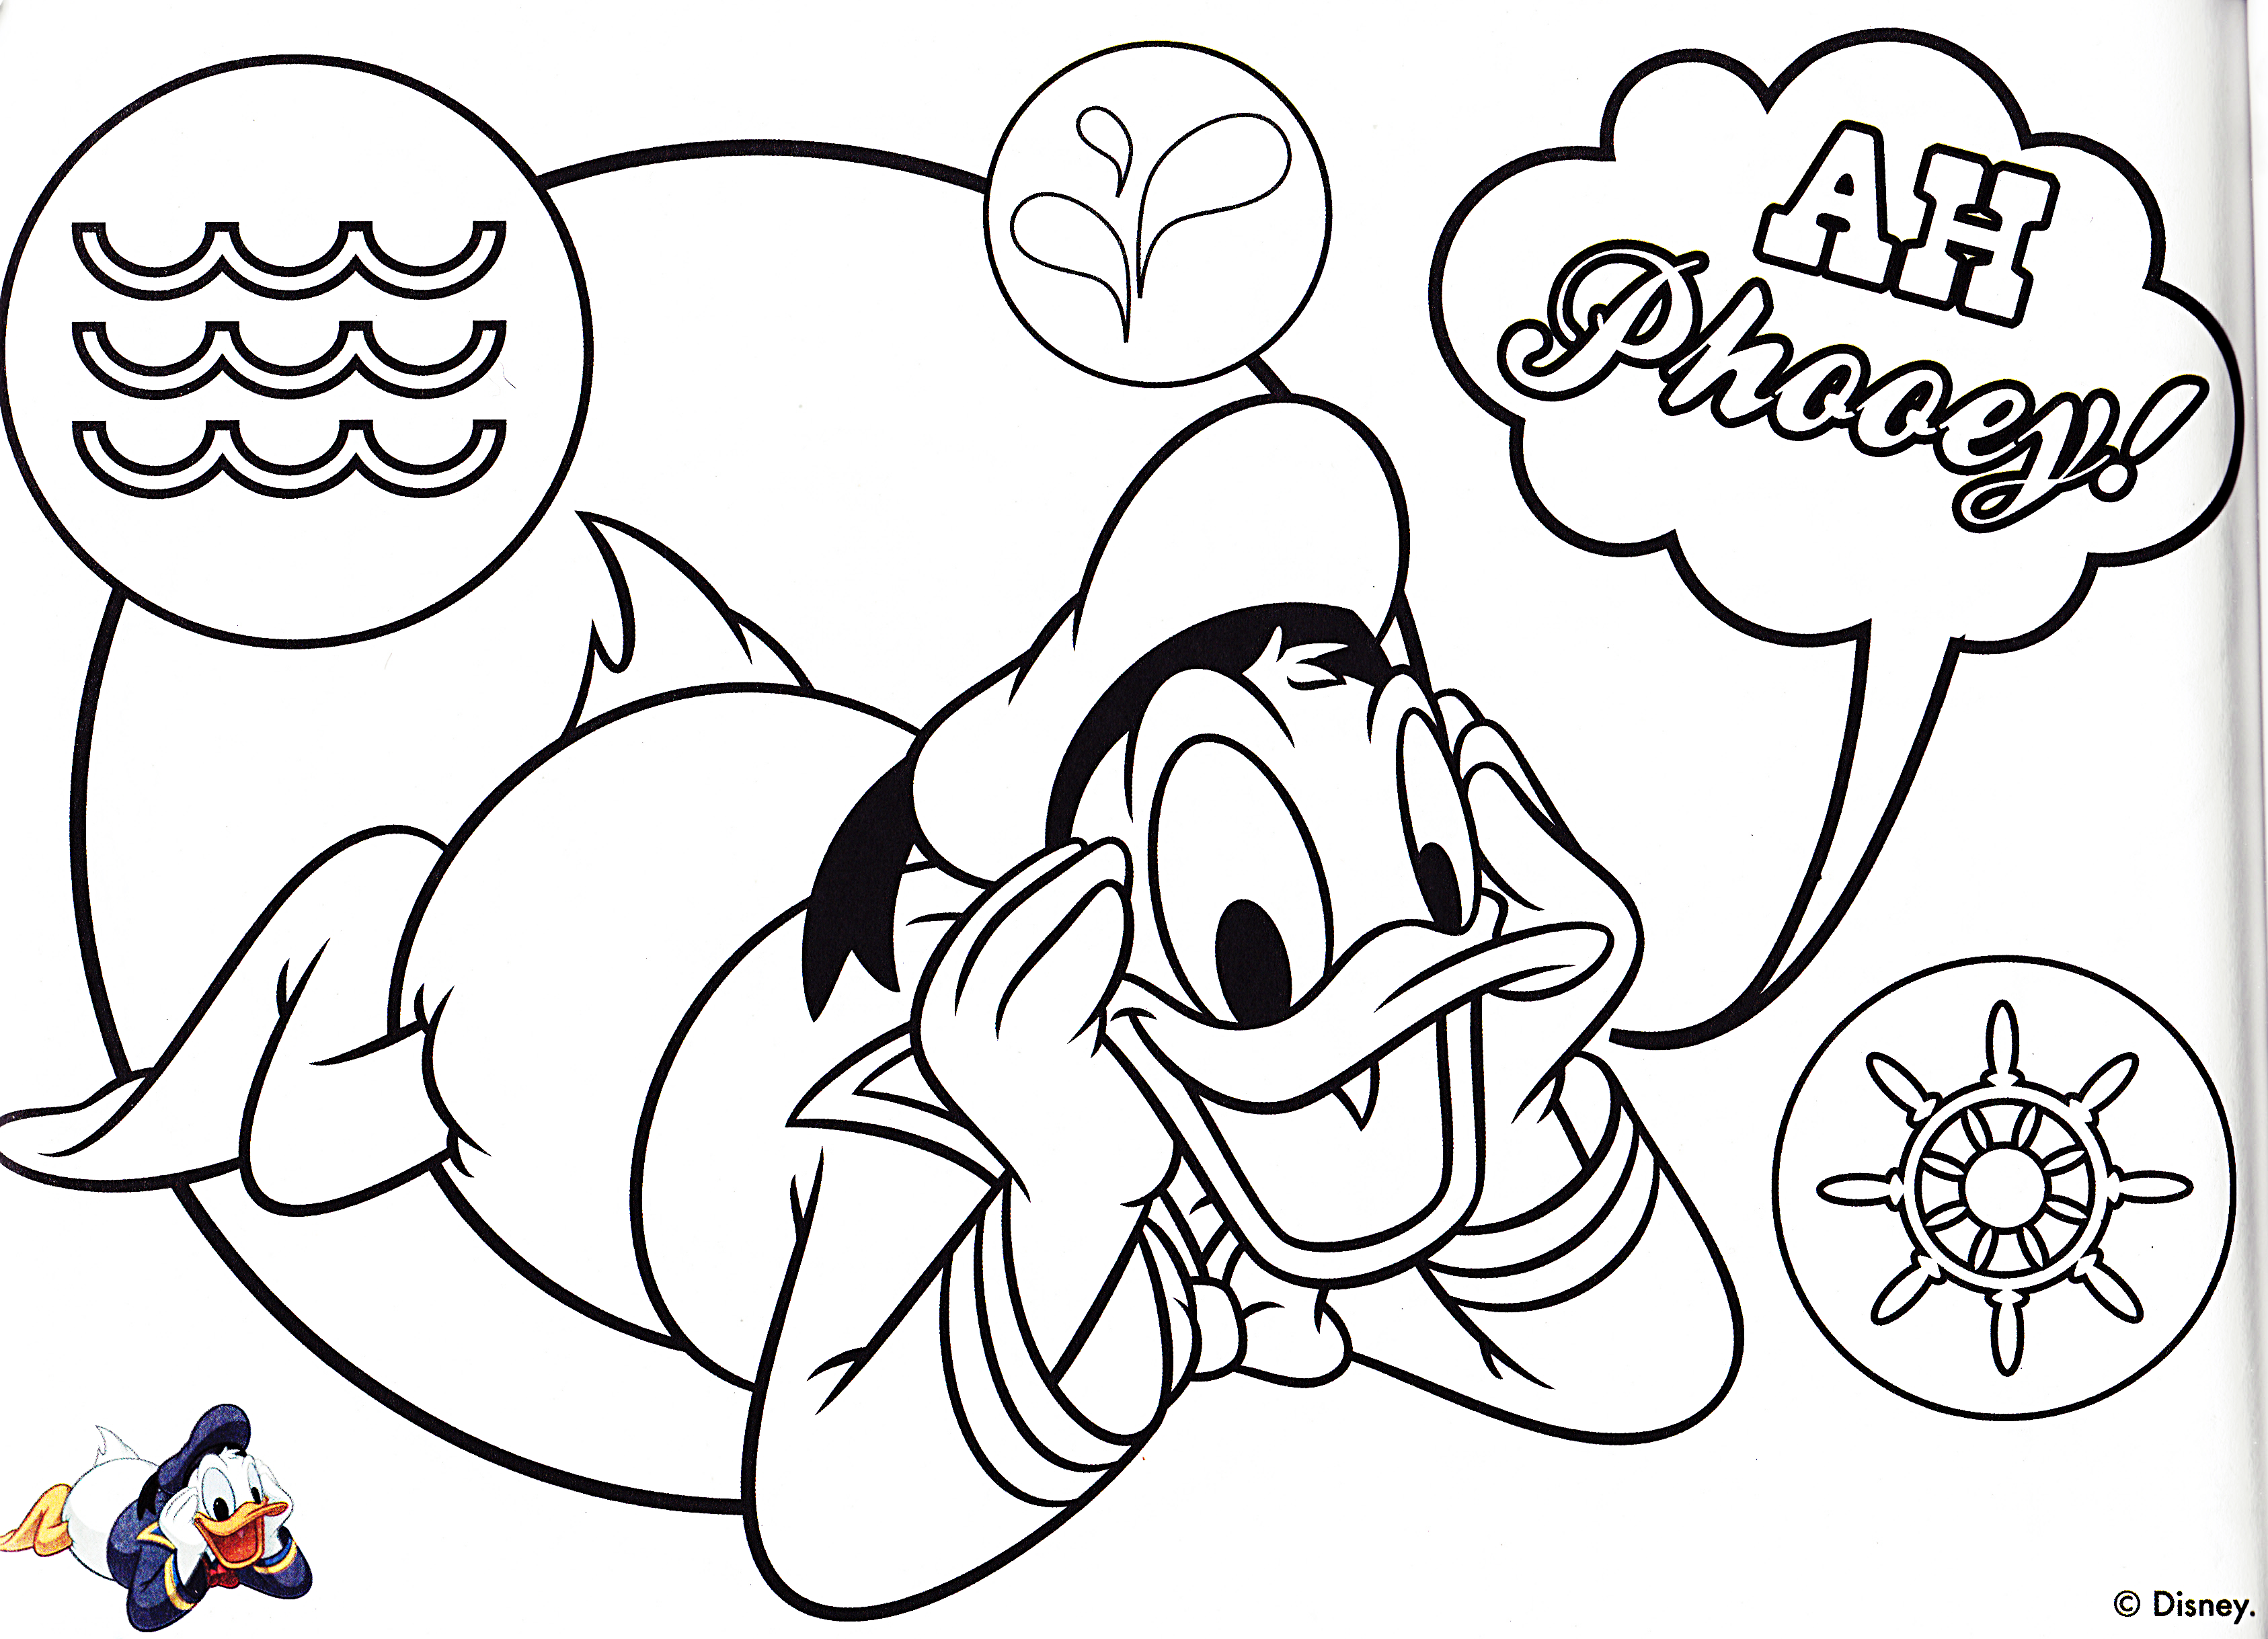 Download Backgammon site vvkf: Coloring Pages Of Donald Duck